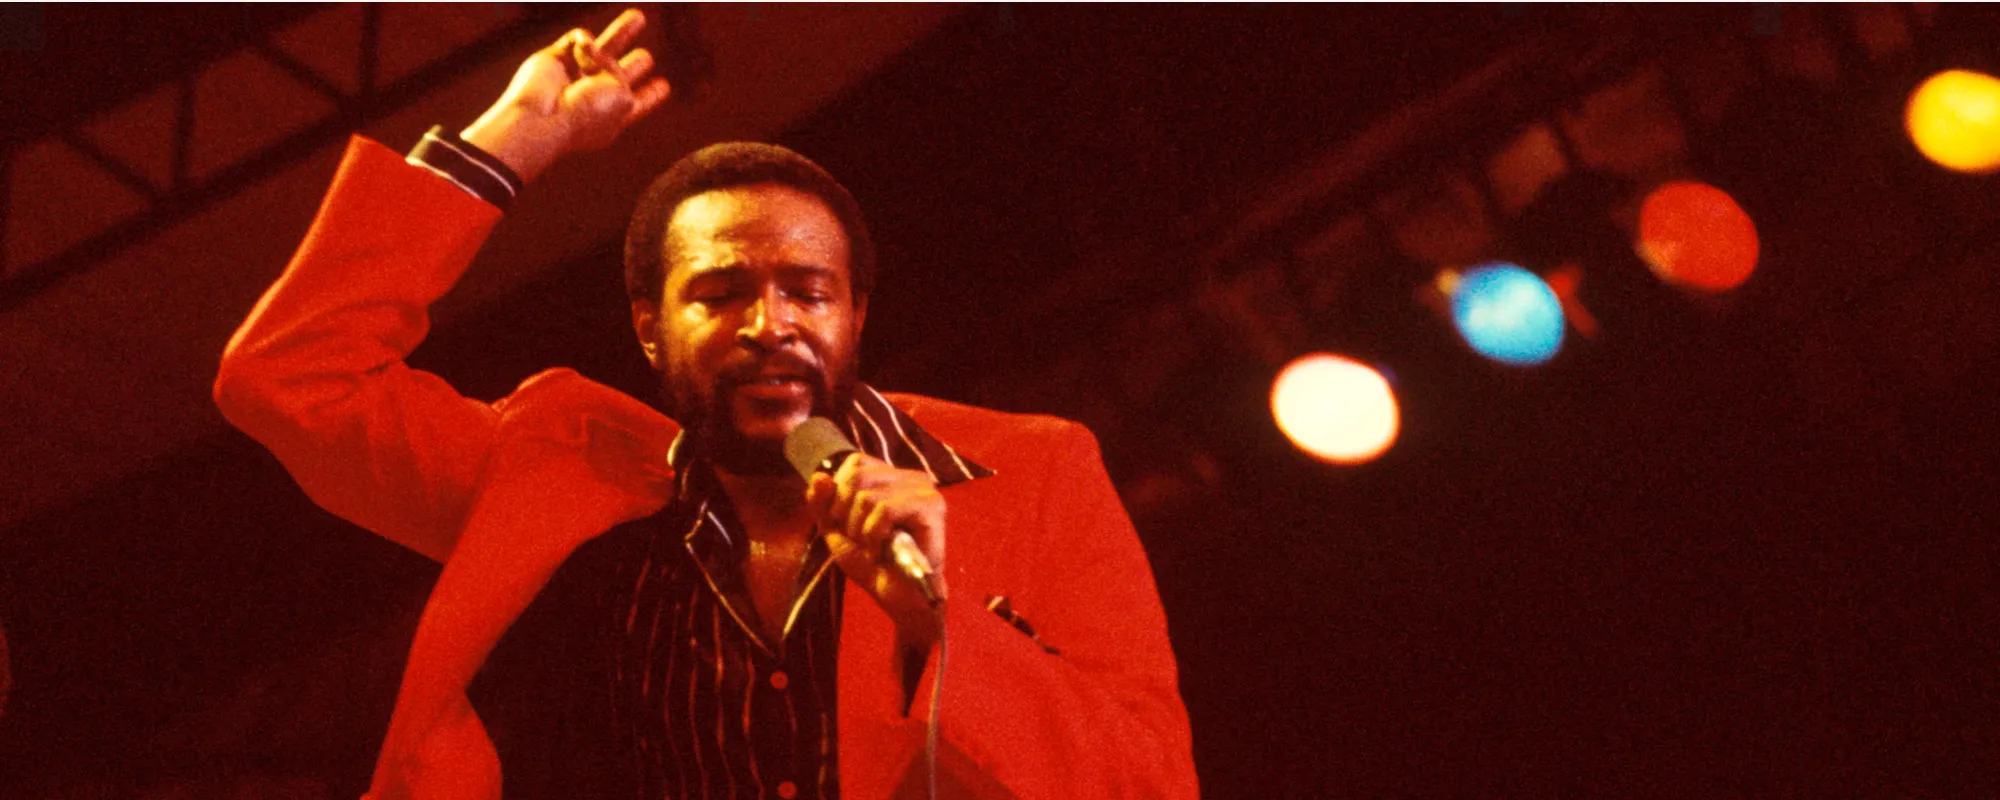 The Story Behind the Murder of Marvin Gaye